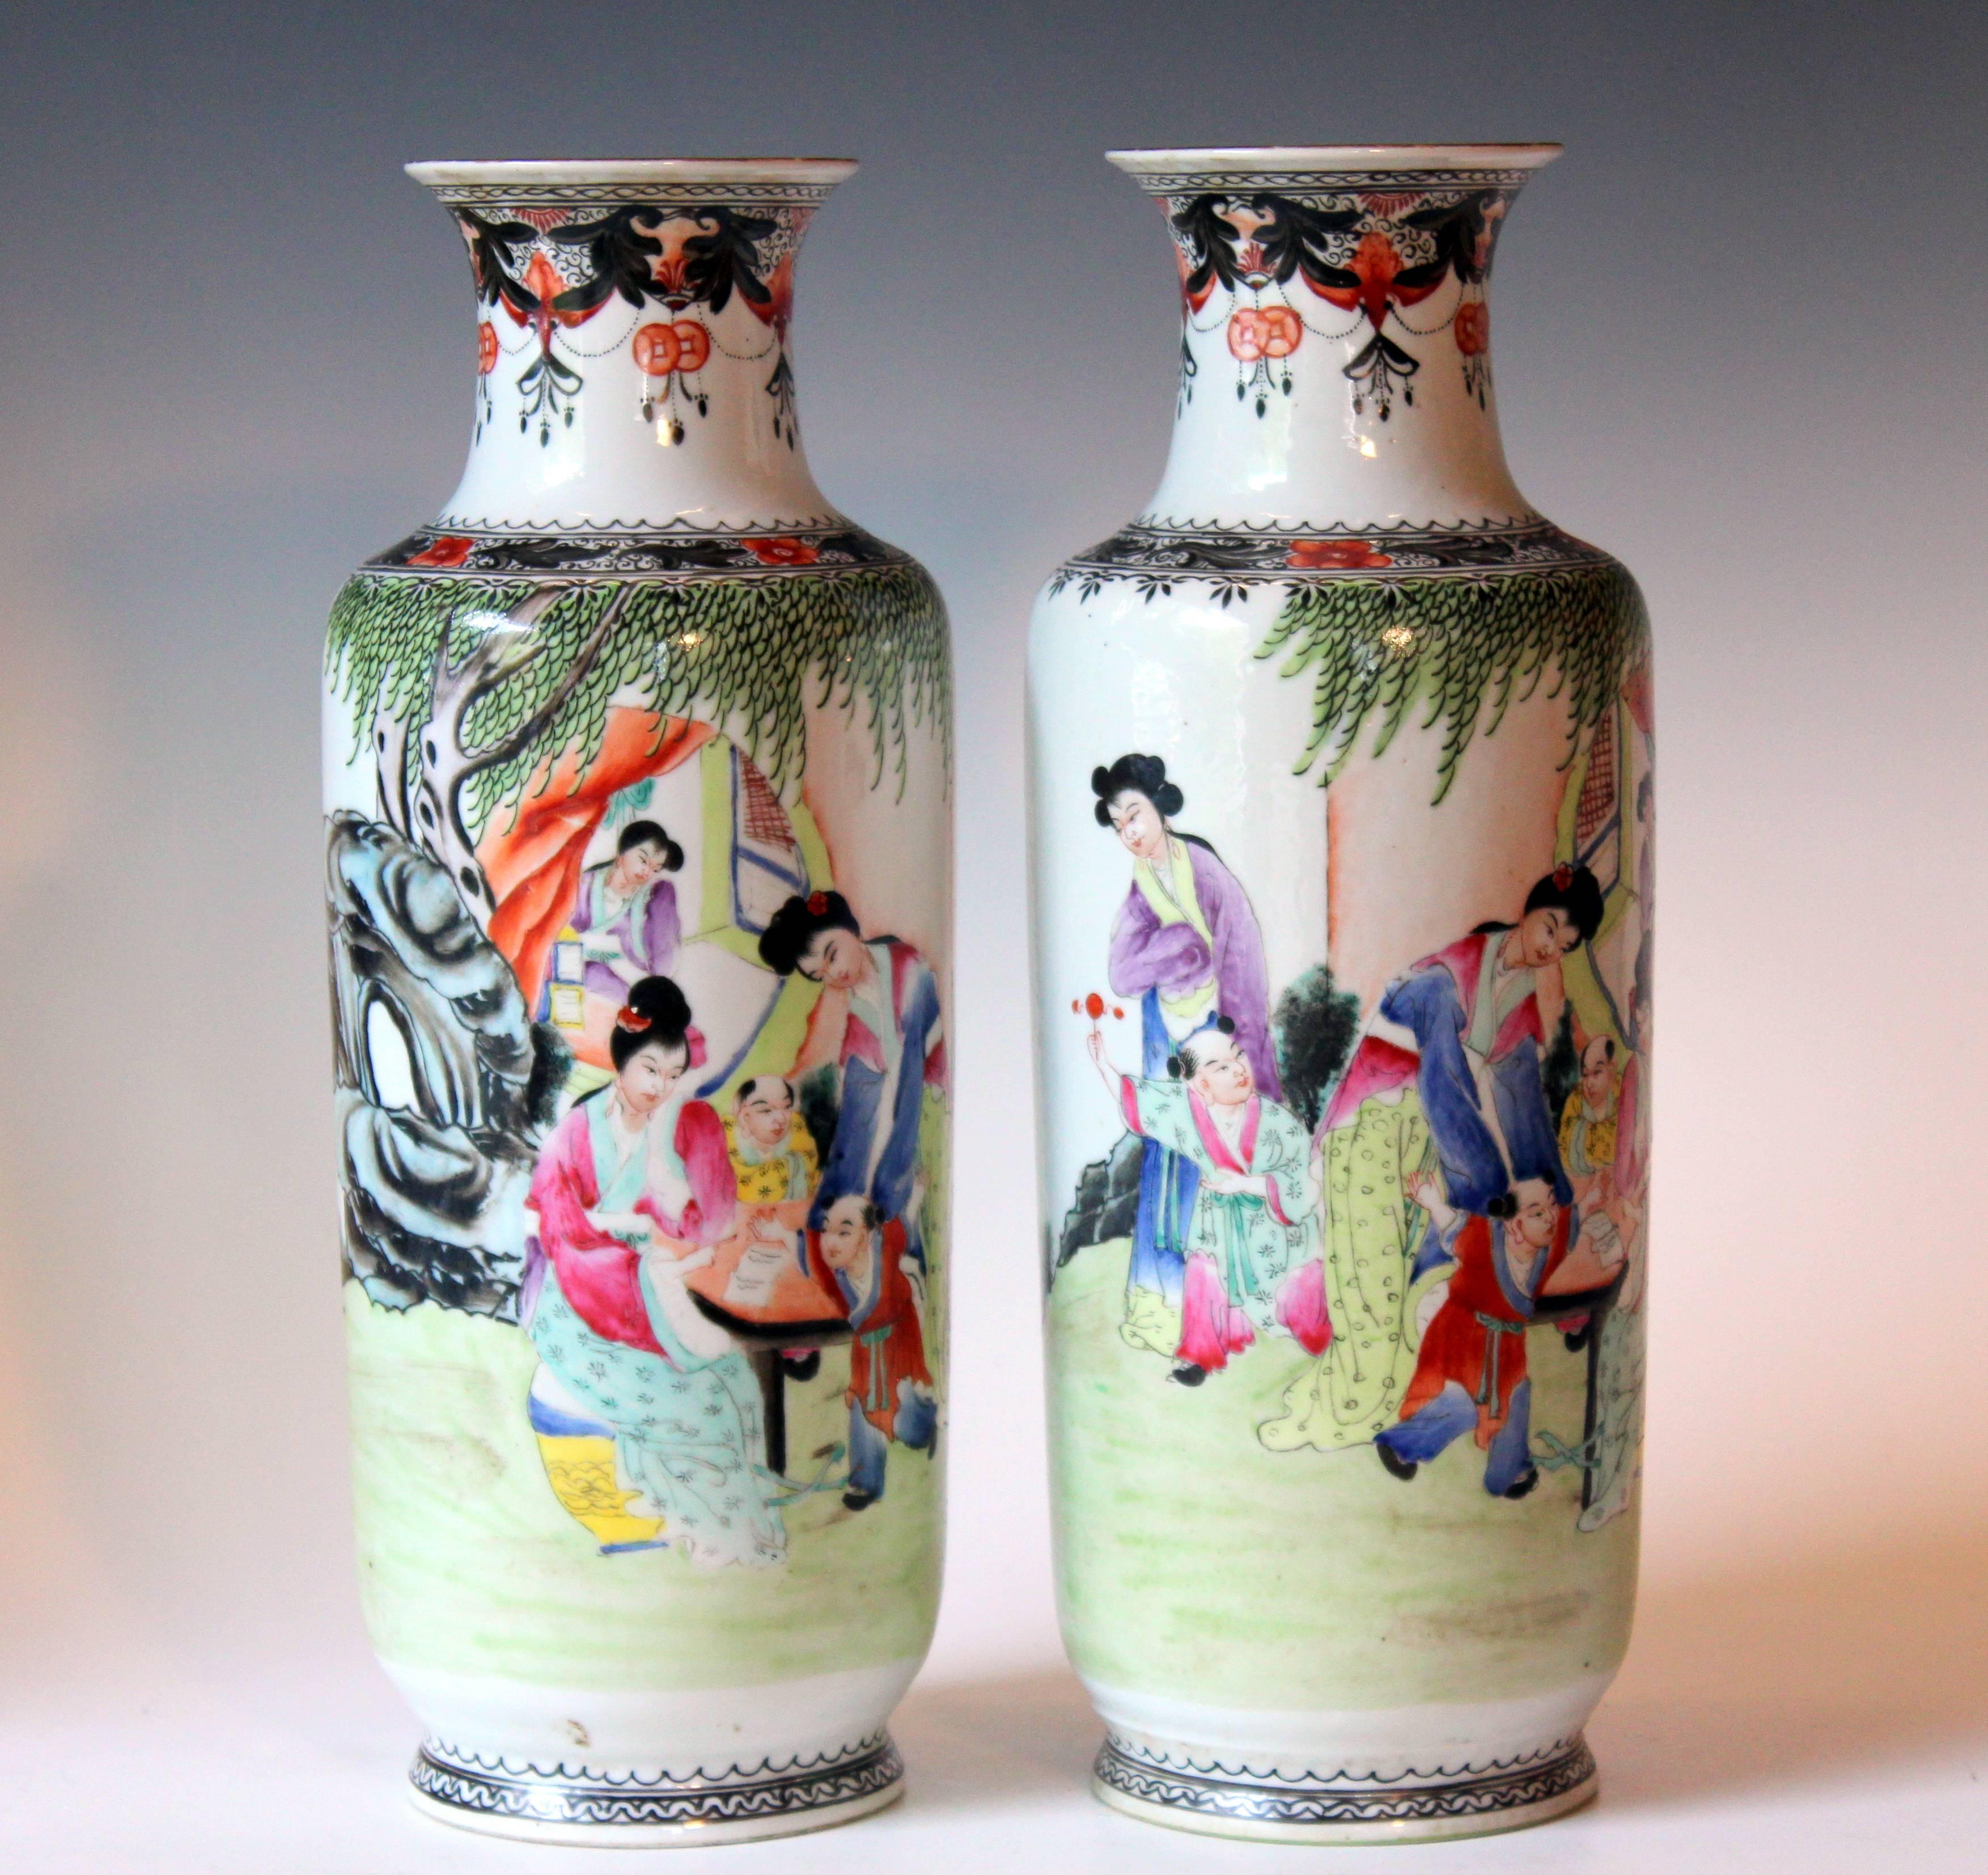 Mirror matched pair of antique Chinese porcelain famille rose vases with continuous scene women and children playing in the garden. With Seal Marks on reverse and base, early 20th century. Nice quality painting. Measure: 13 1/4